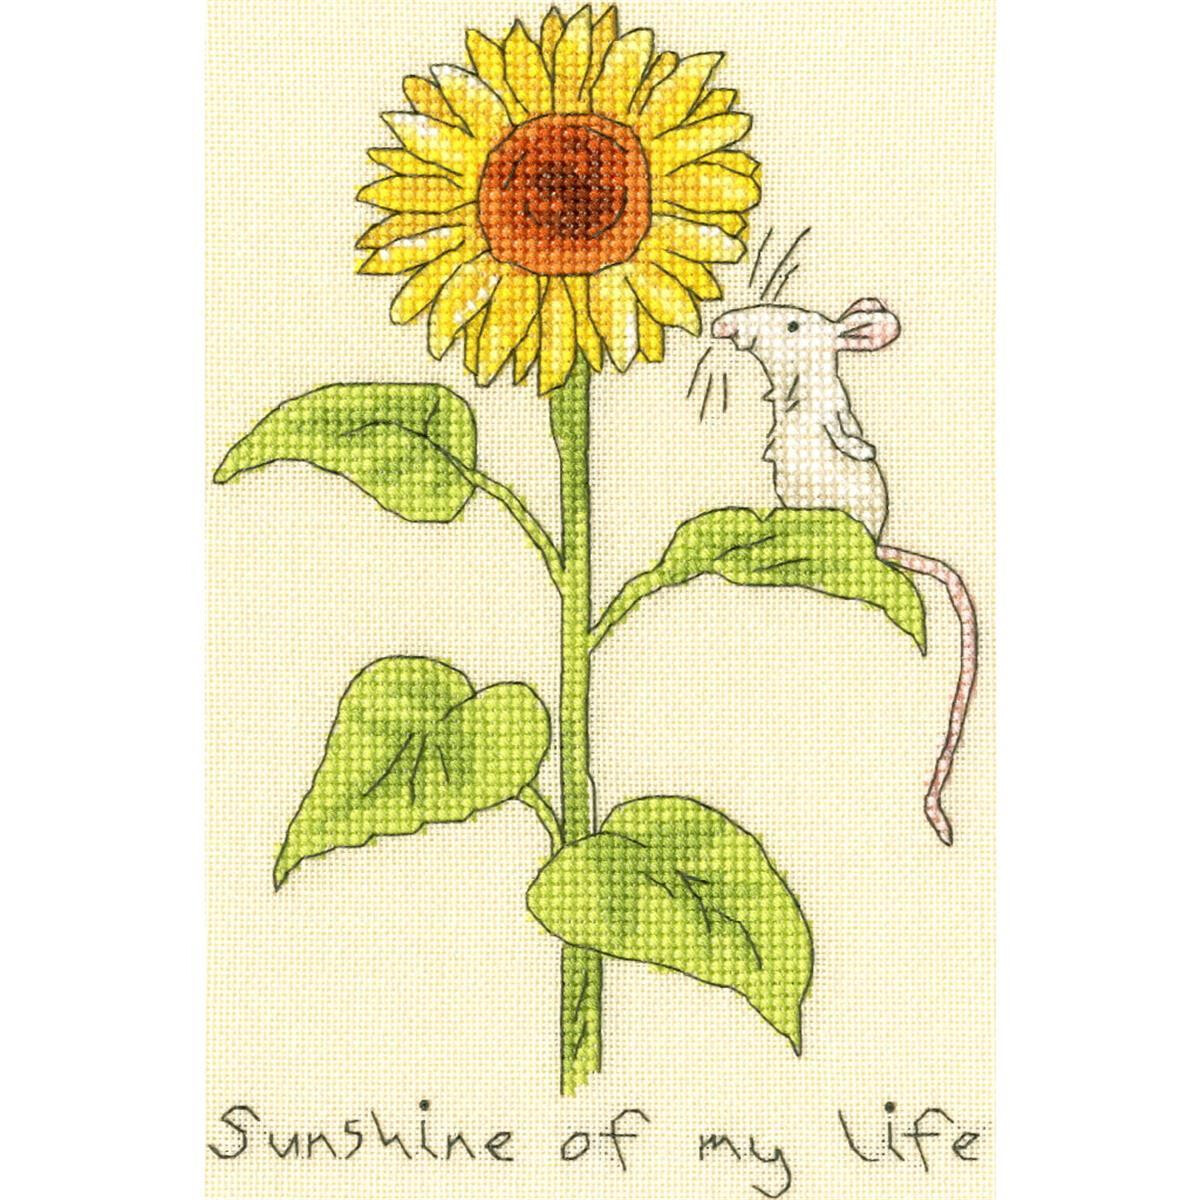 A cross-stitch design shows a large sunflower with large...